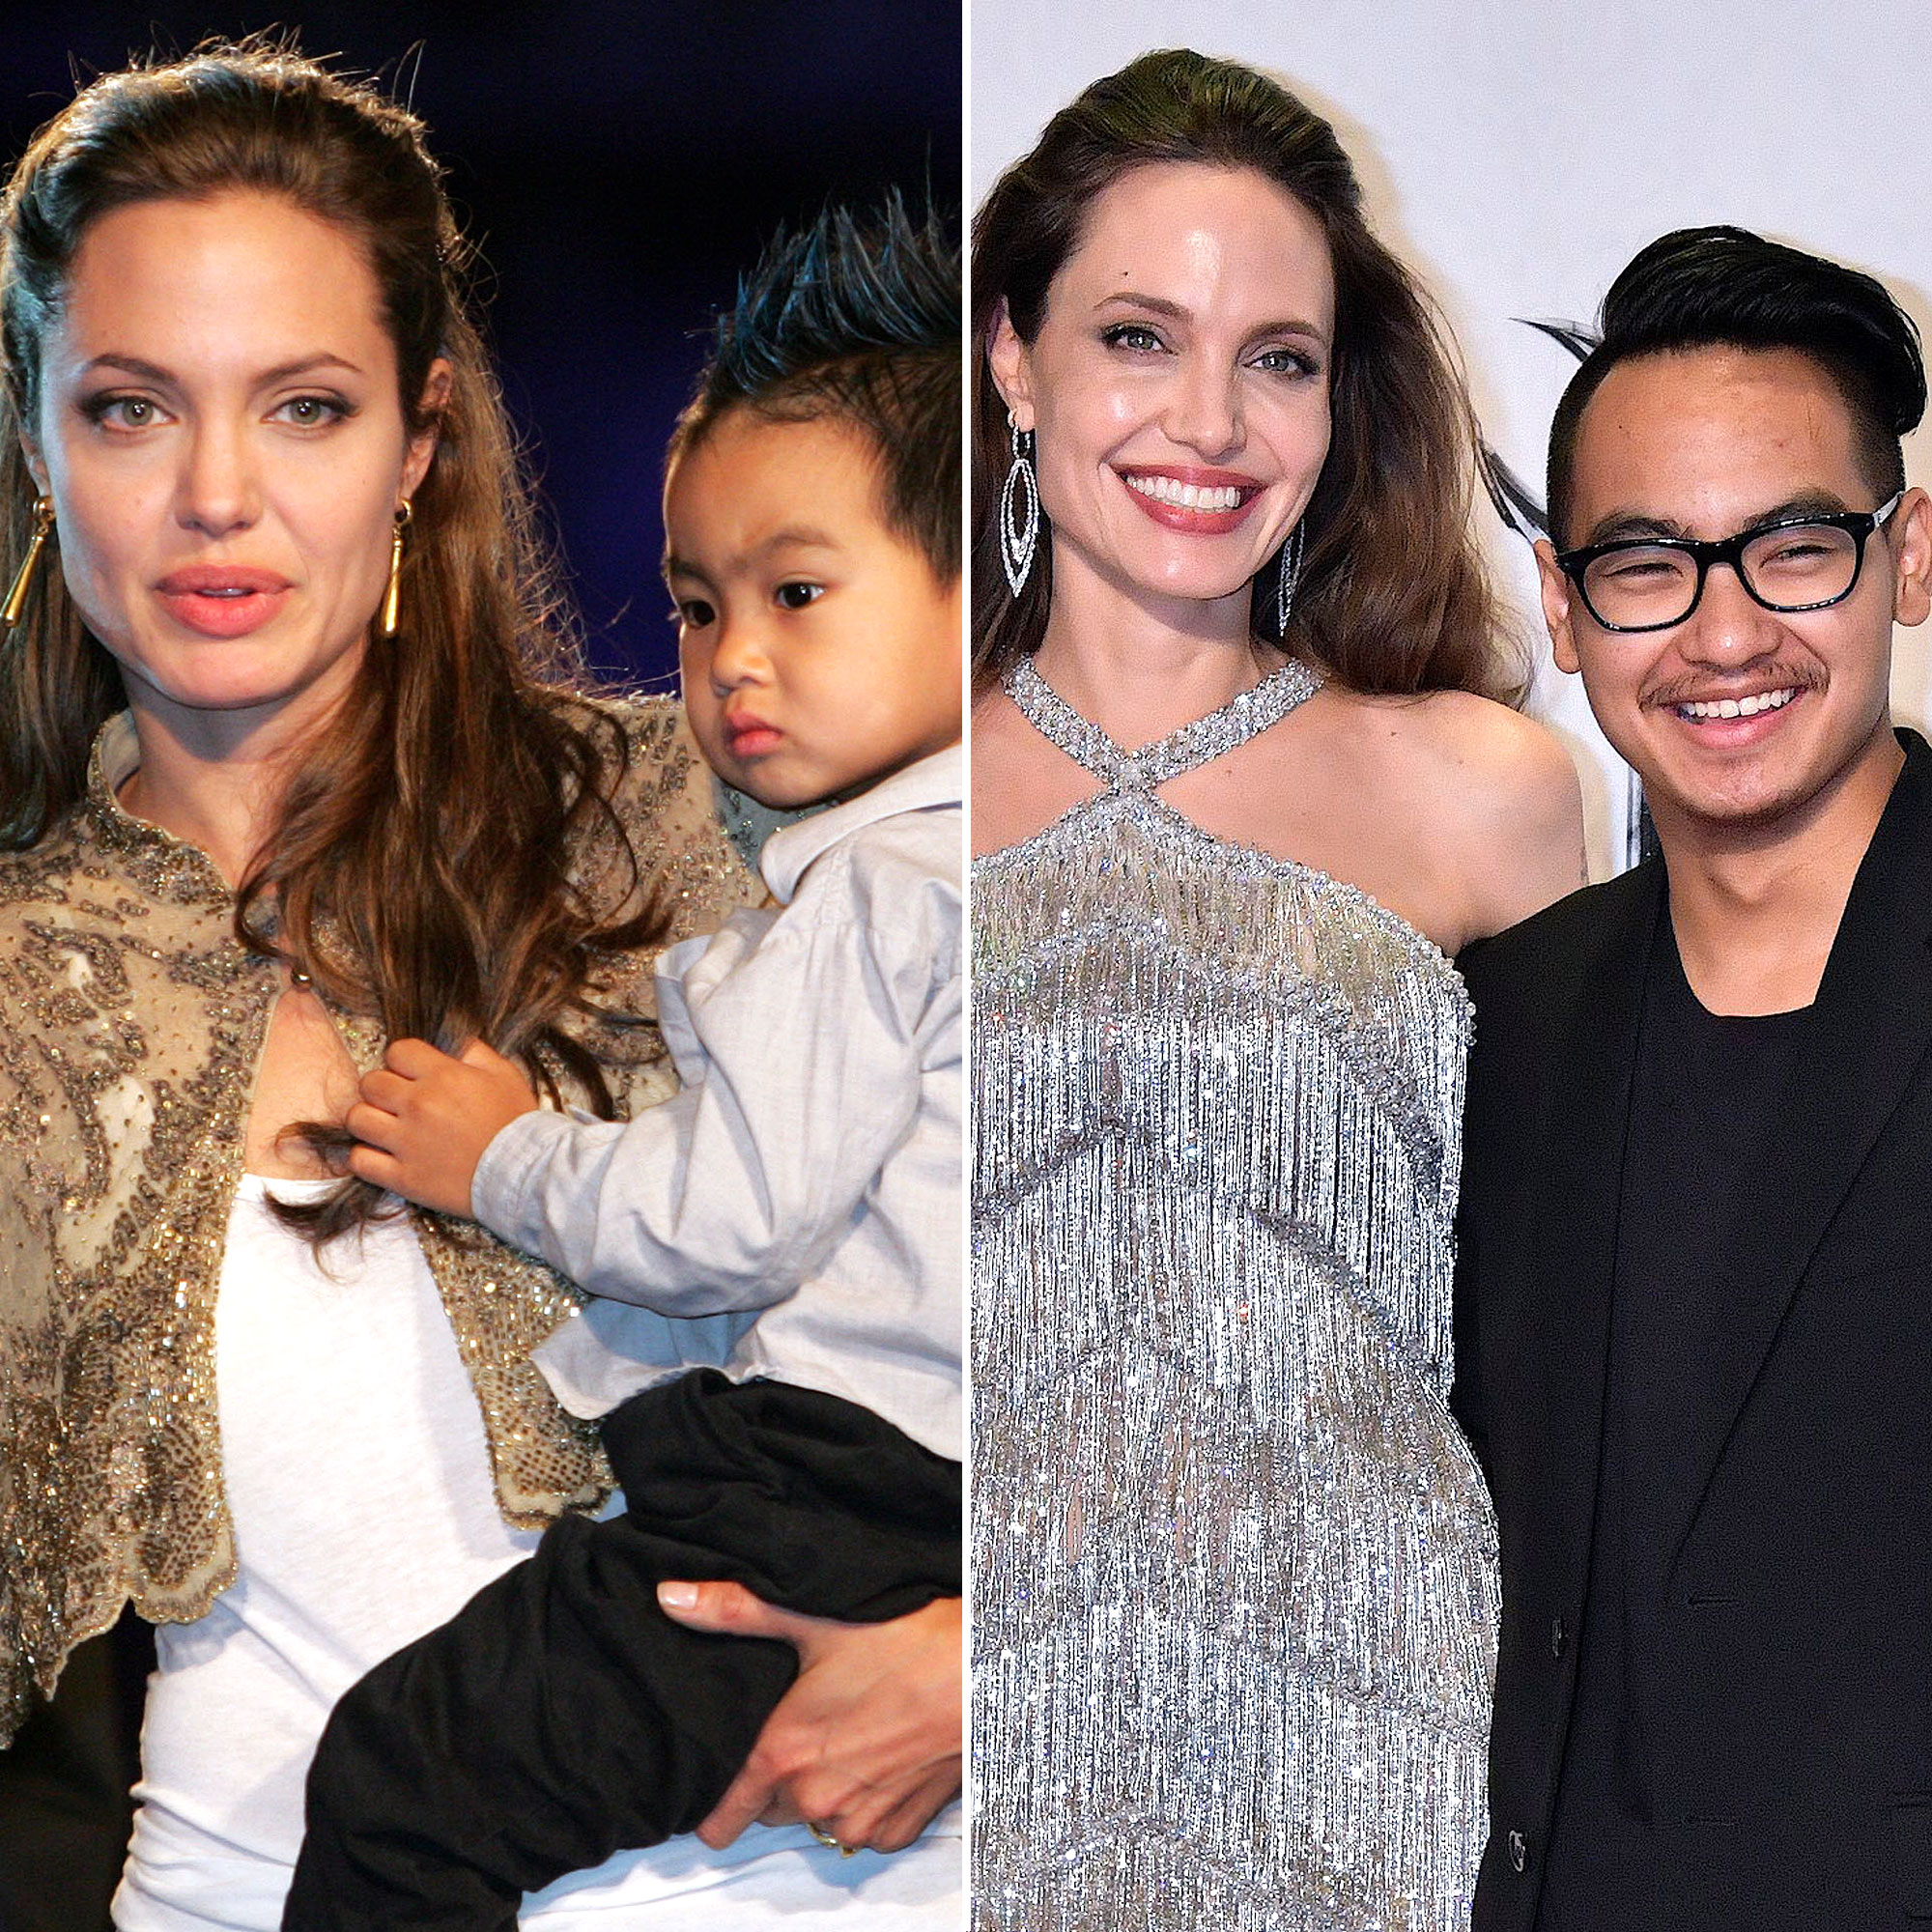 Brad Pitt And Angelina Jolie Have 6 Kids And Here's Who They Are